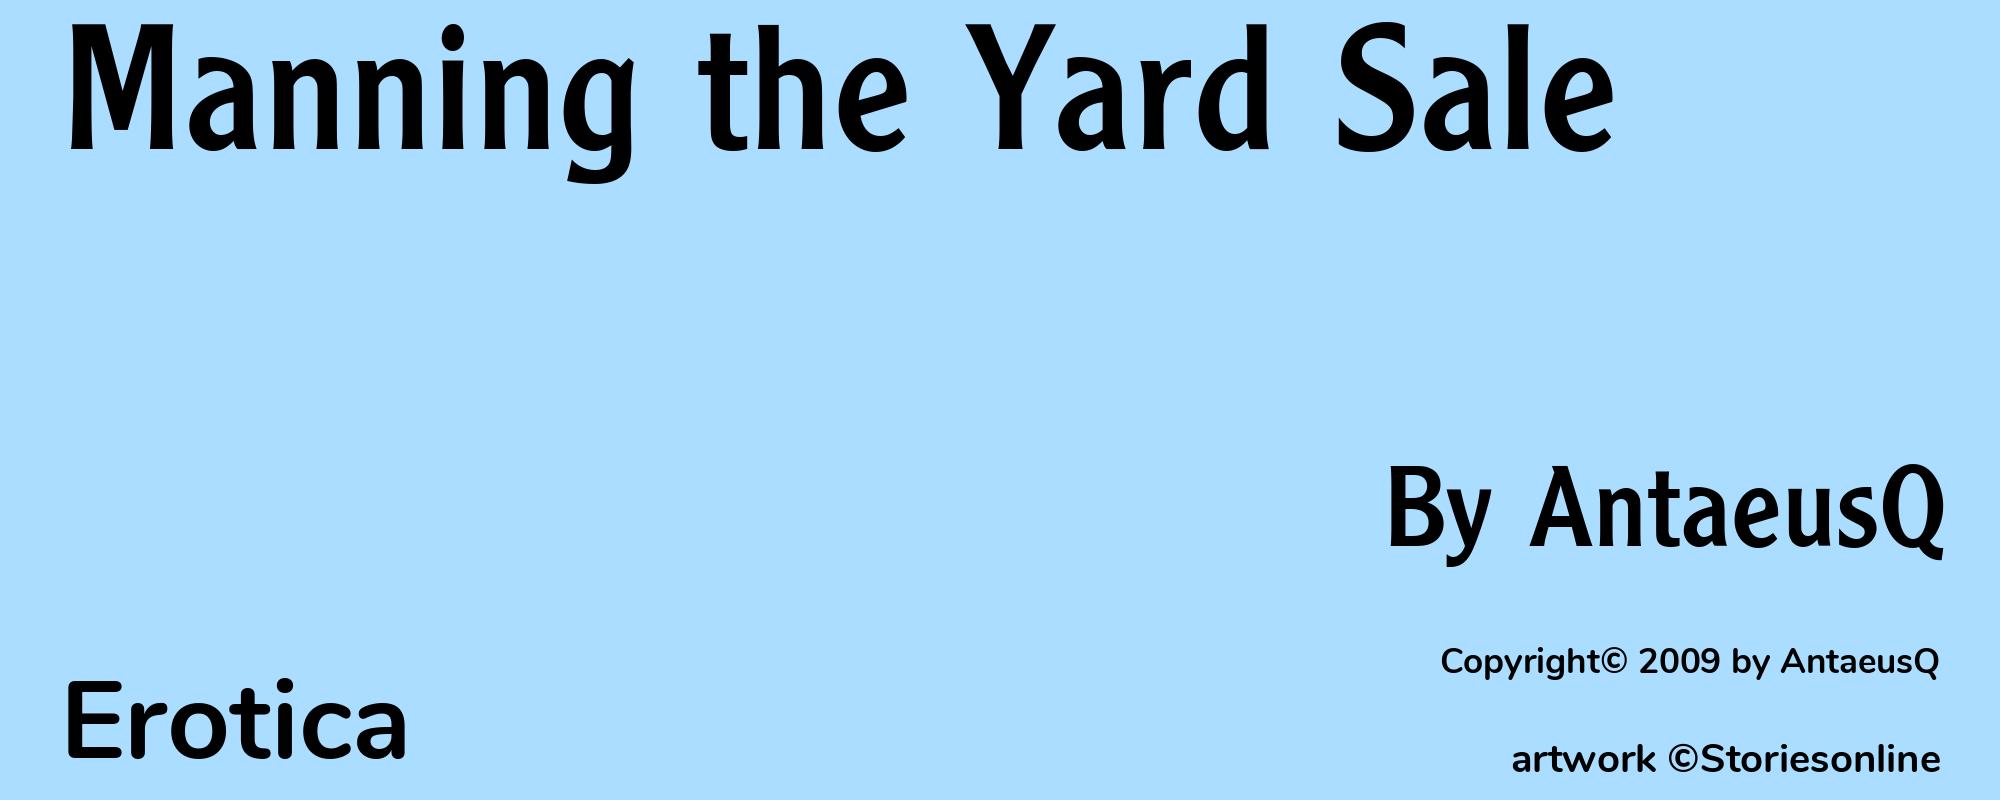 Manning the Yard Sale - Cover